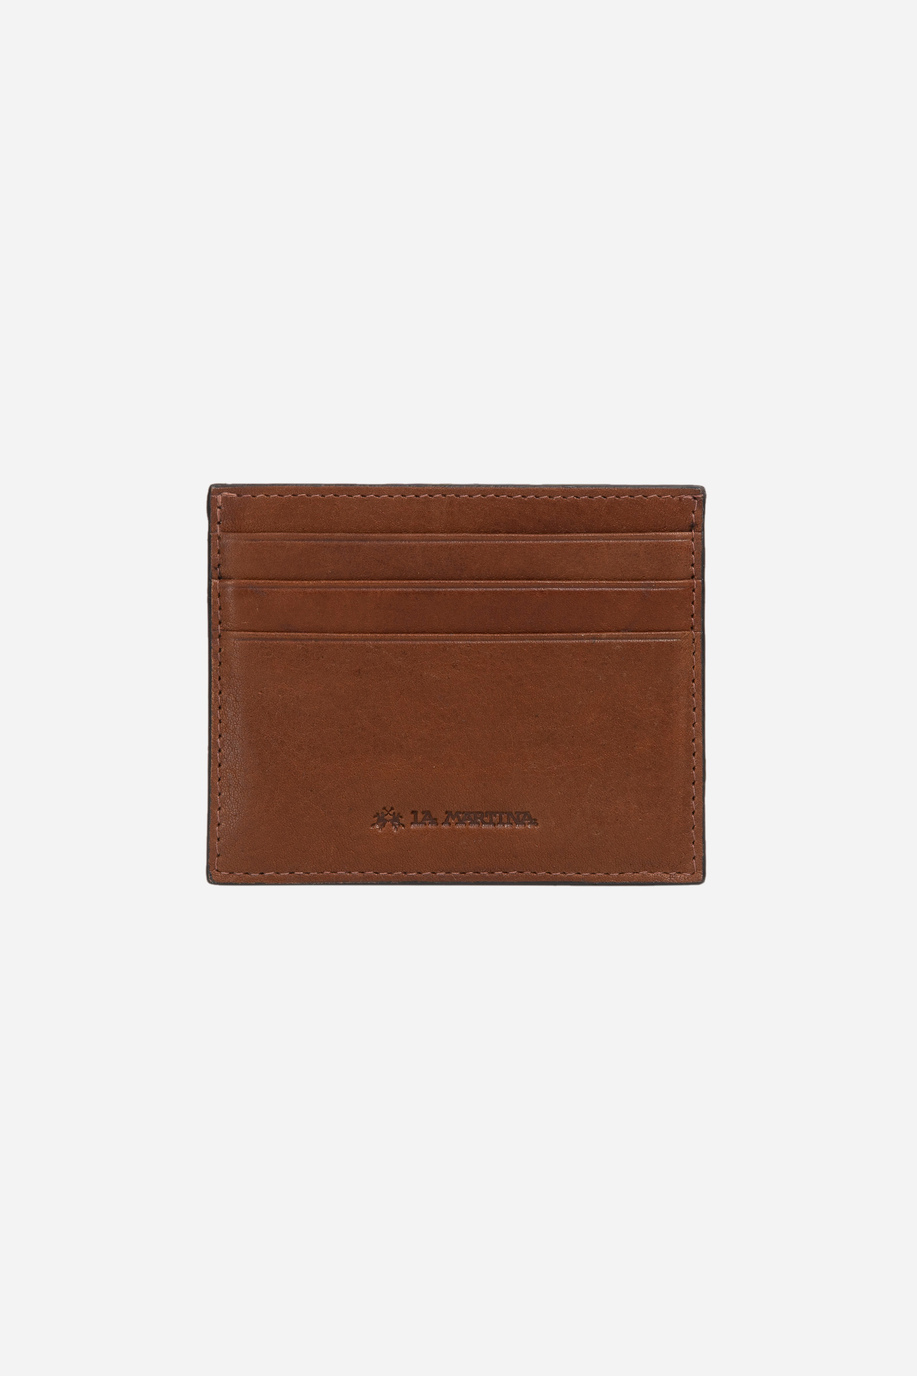 Leather card holder - Paulo - Wallets and key chains | La Martina - Official Online Shop